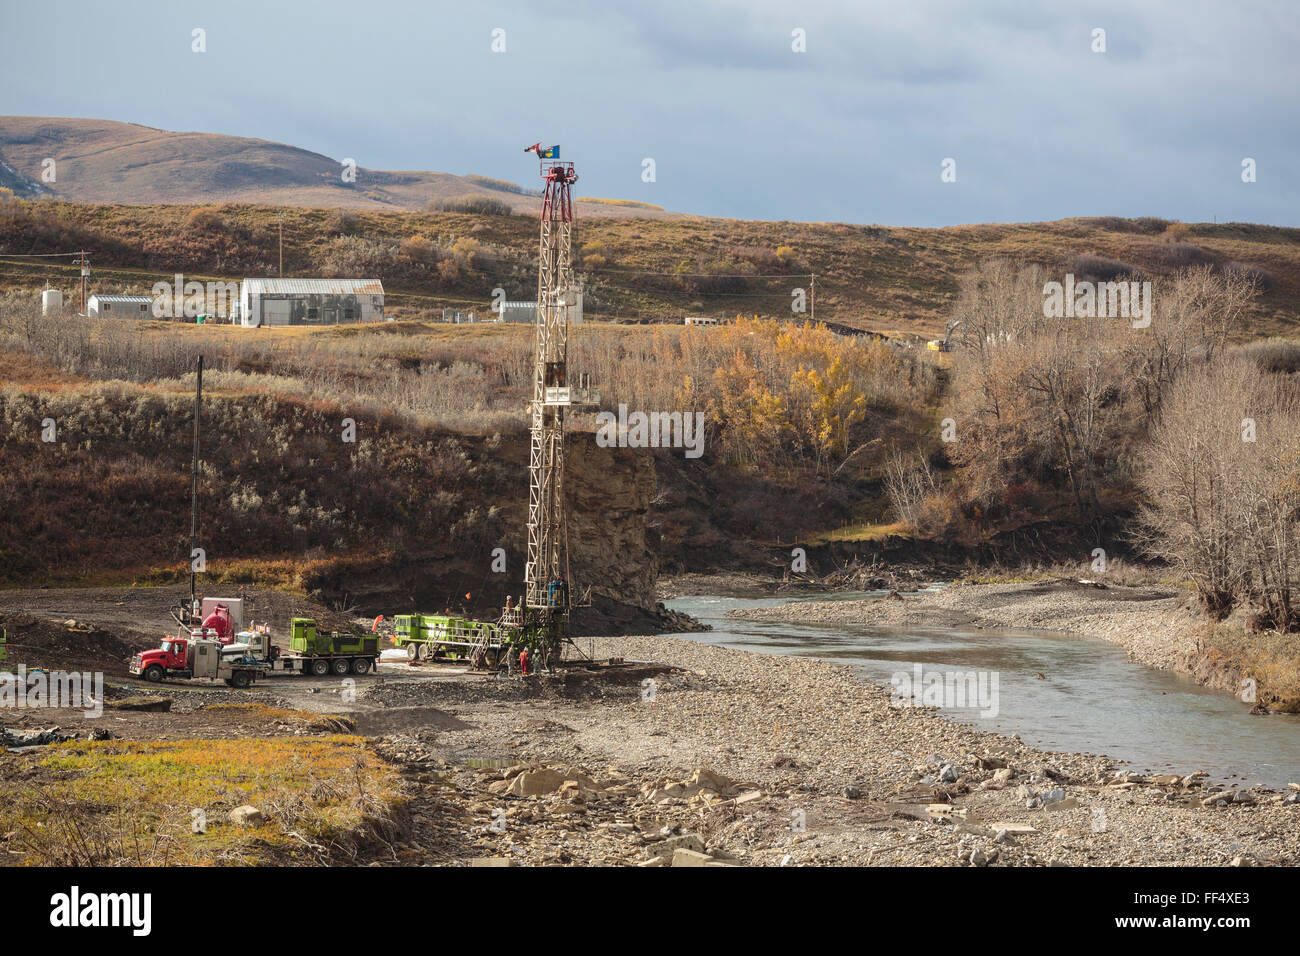 An oil and gas service rig works on a washed out wellsite along the shore of Highwood River in the southern Alberta foothills Stock Photo